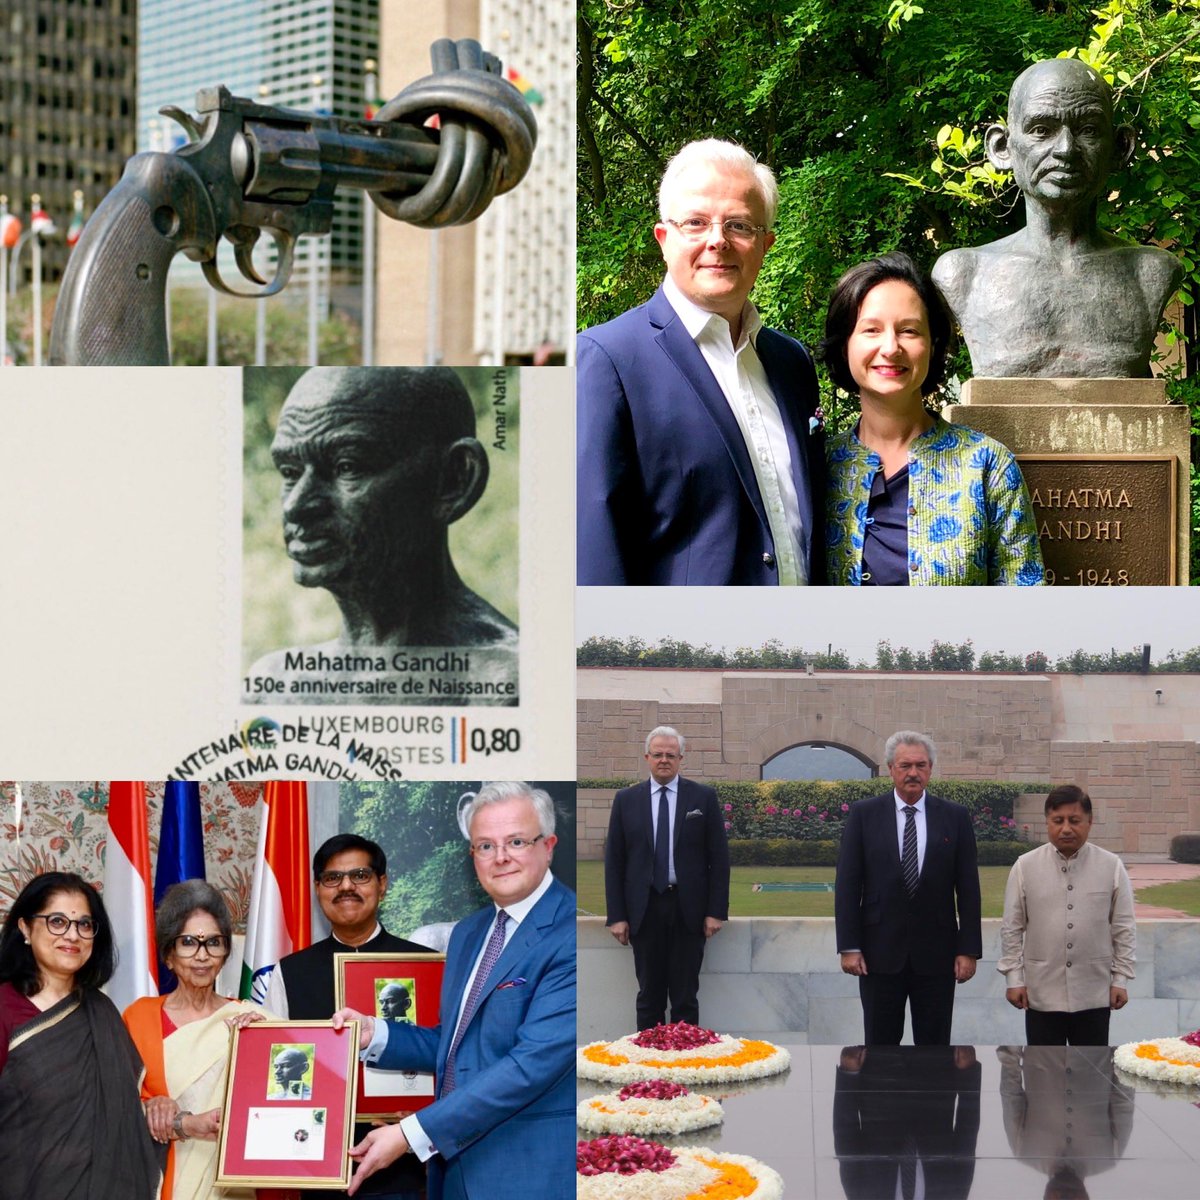 Happy #GandhiJayanti commemorating #MahatmaGandhi remembering last years celebrations and the launch of the special stamp. Celebrating the internat. Day of #nonviolence 🇱🇺 🇺🇳🇮🇳 #KnottedGun sculpture #nonviolence by C.F. #Reutergift gifted by the 🇱🇺 Gov. to the #UN #LUinIndia